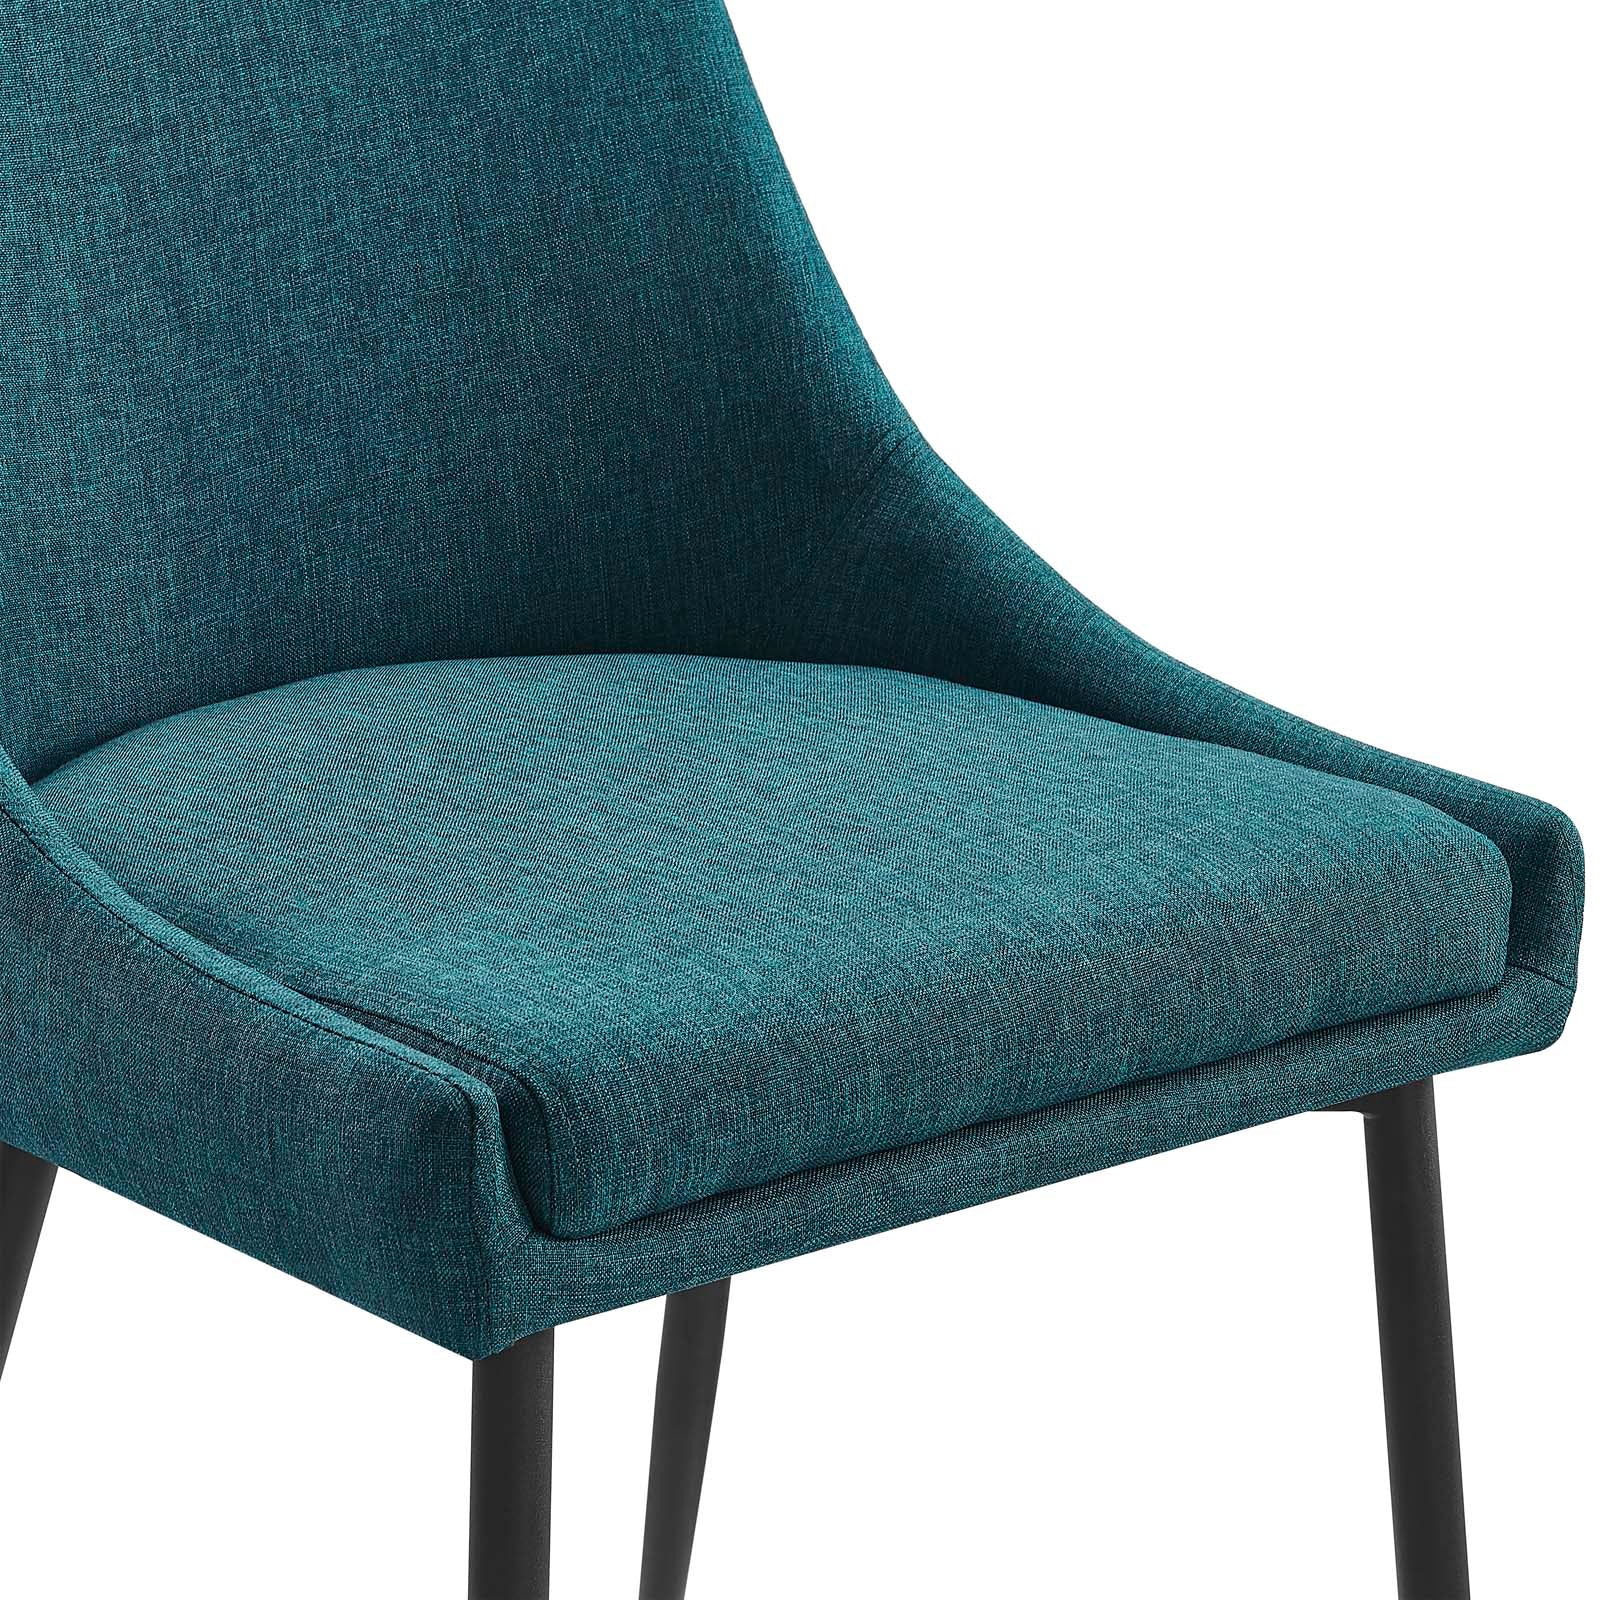 Modway Dining Chairs - Viscount Dining Chairs Black & Teal (Set Of 2)